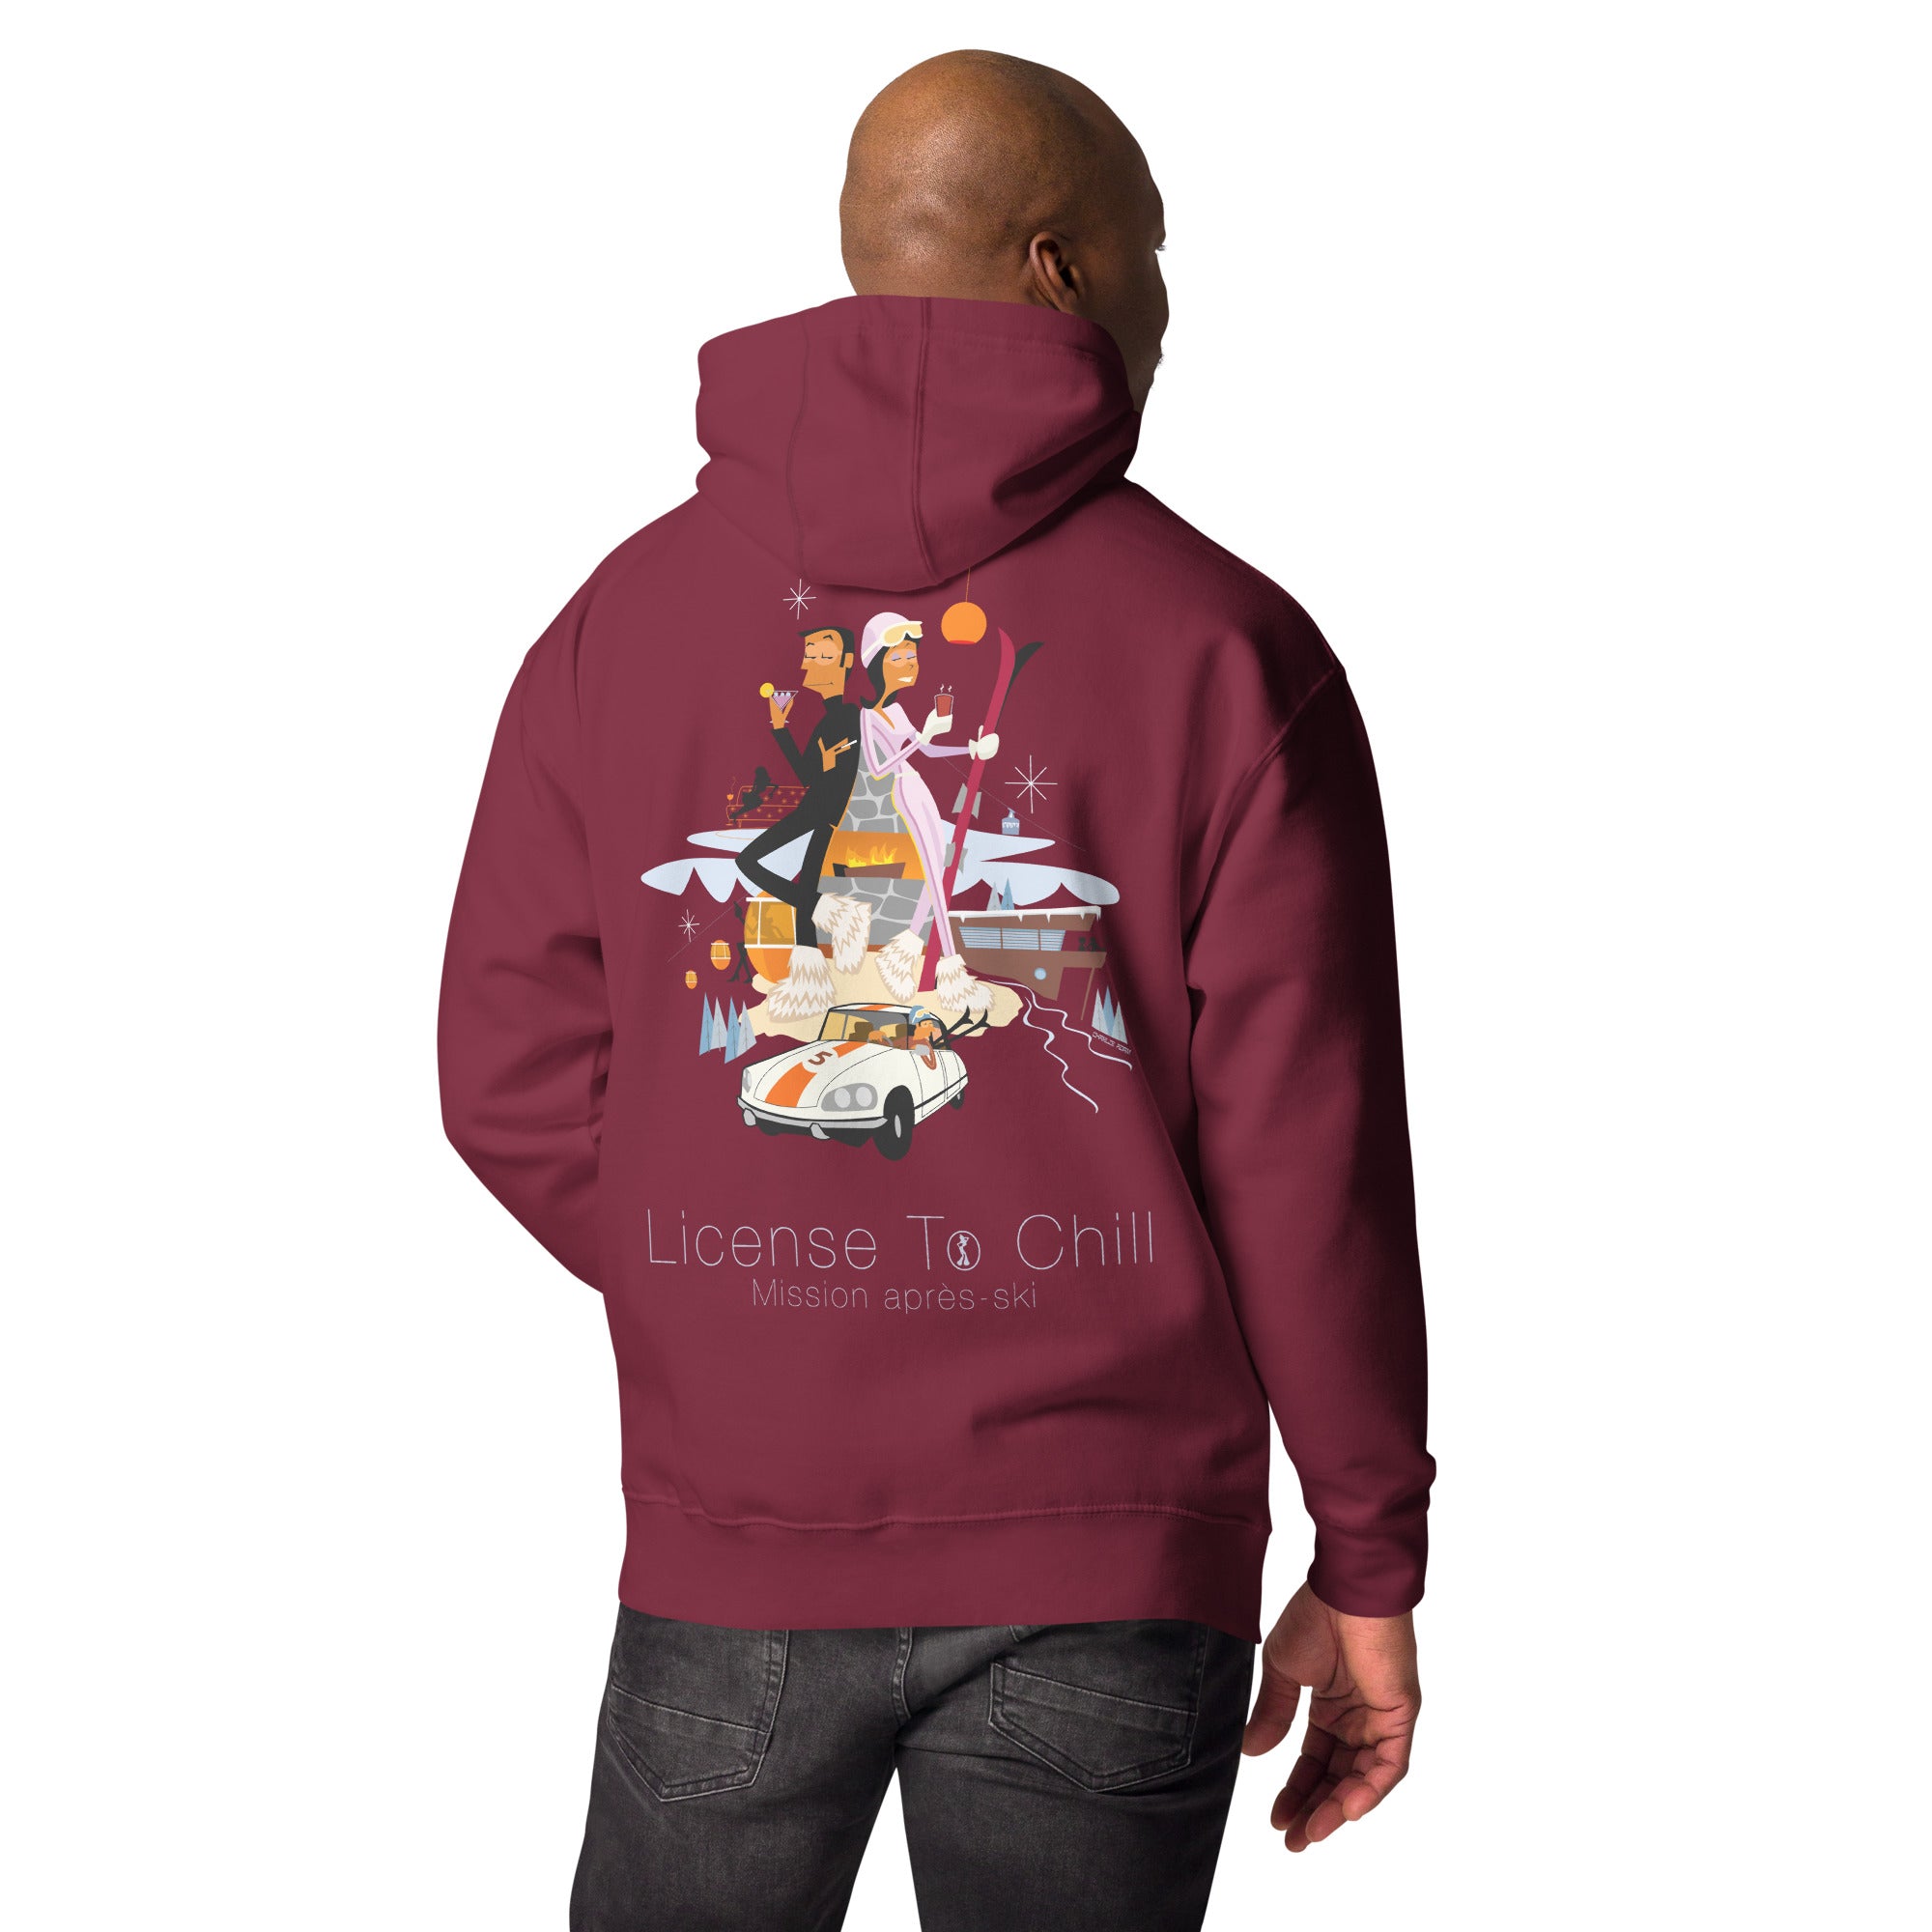 Unisex Cotton Hoodie License To Chill Mission Après-Ski (front & back)